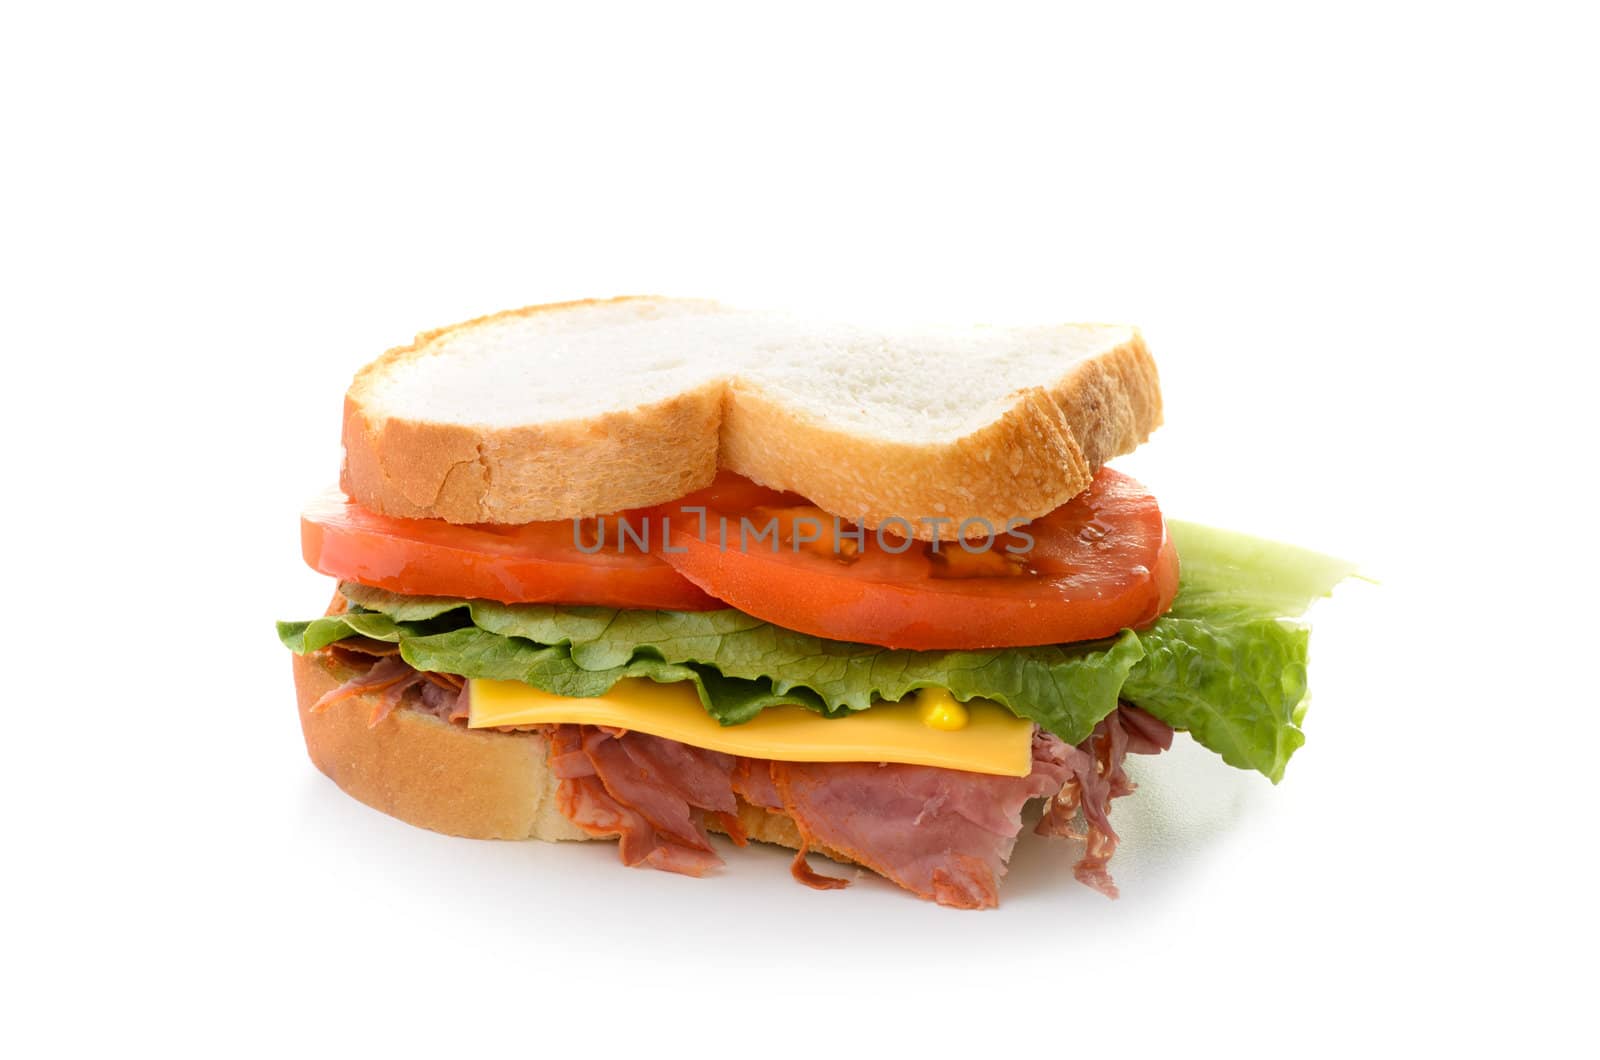 A corned beef sandwich with lettuce and tomatoes.